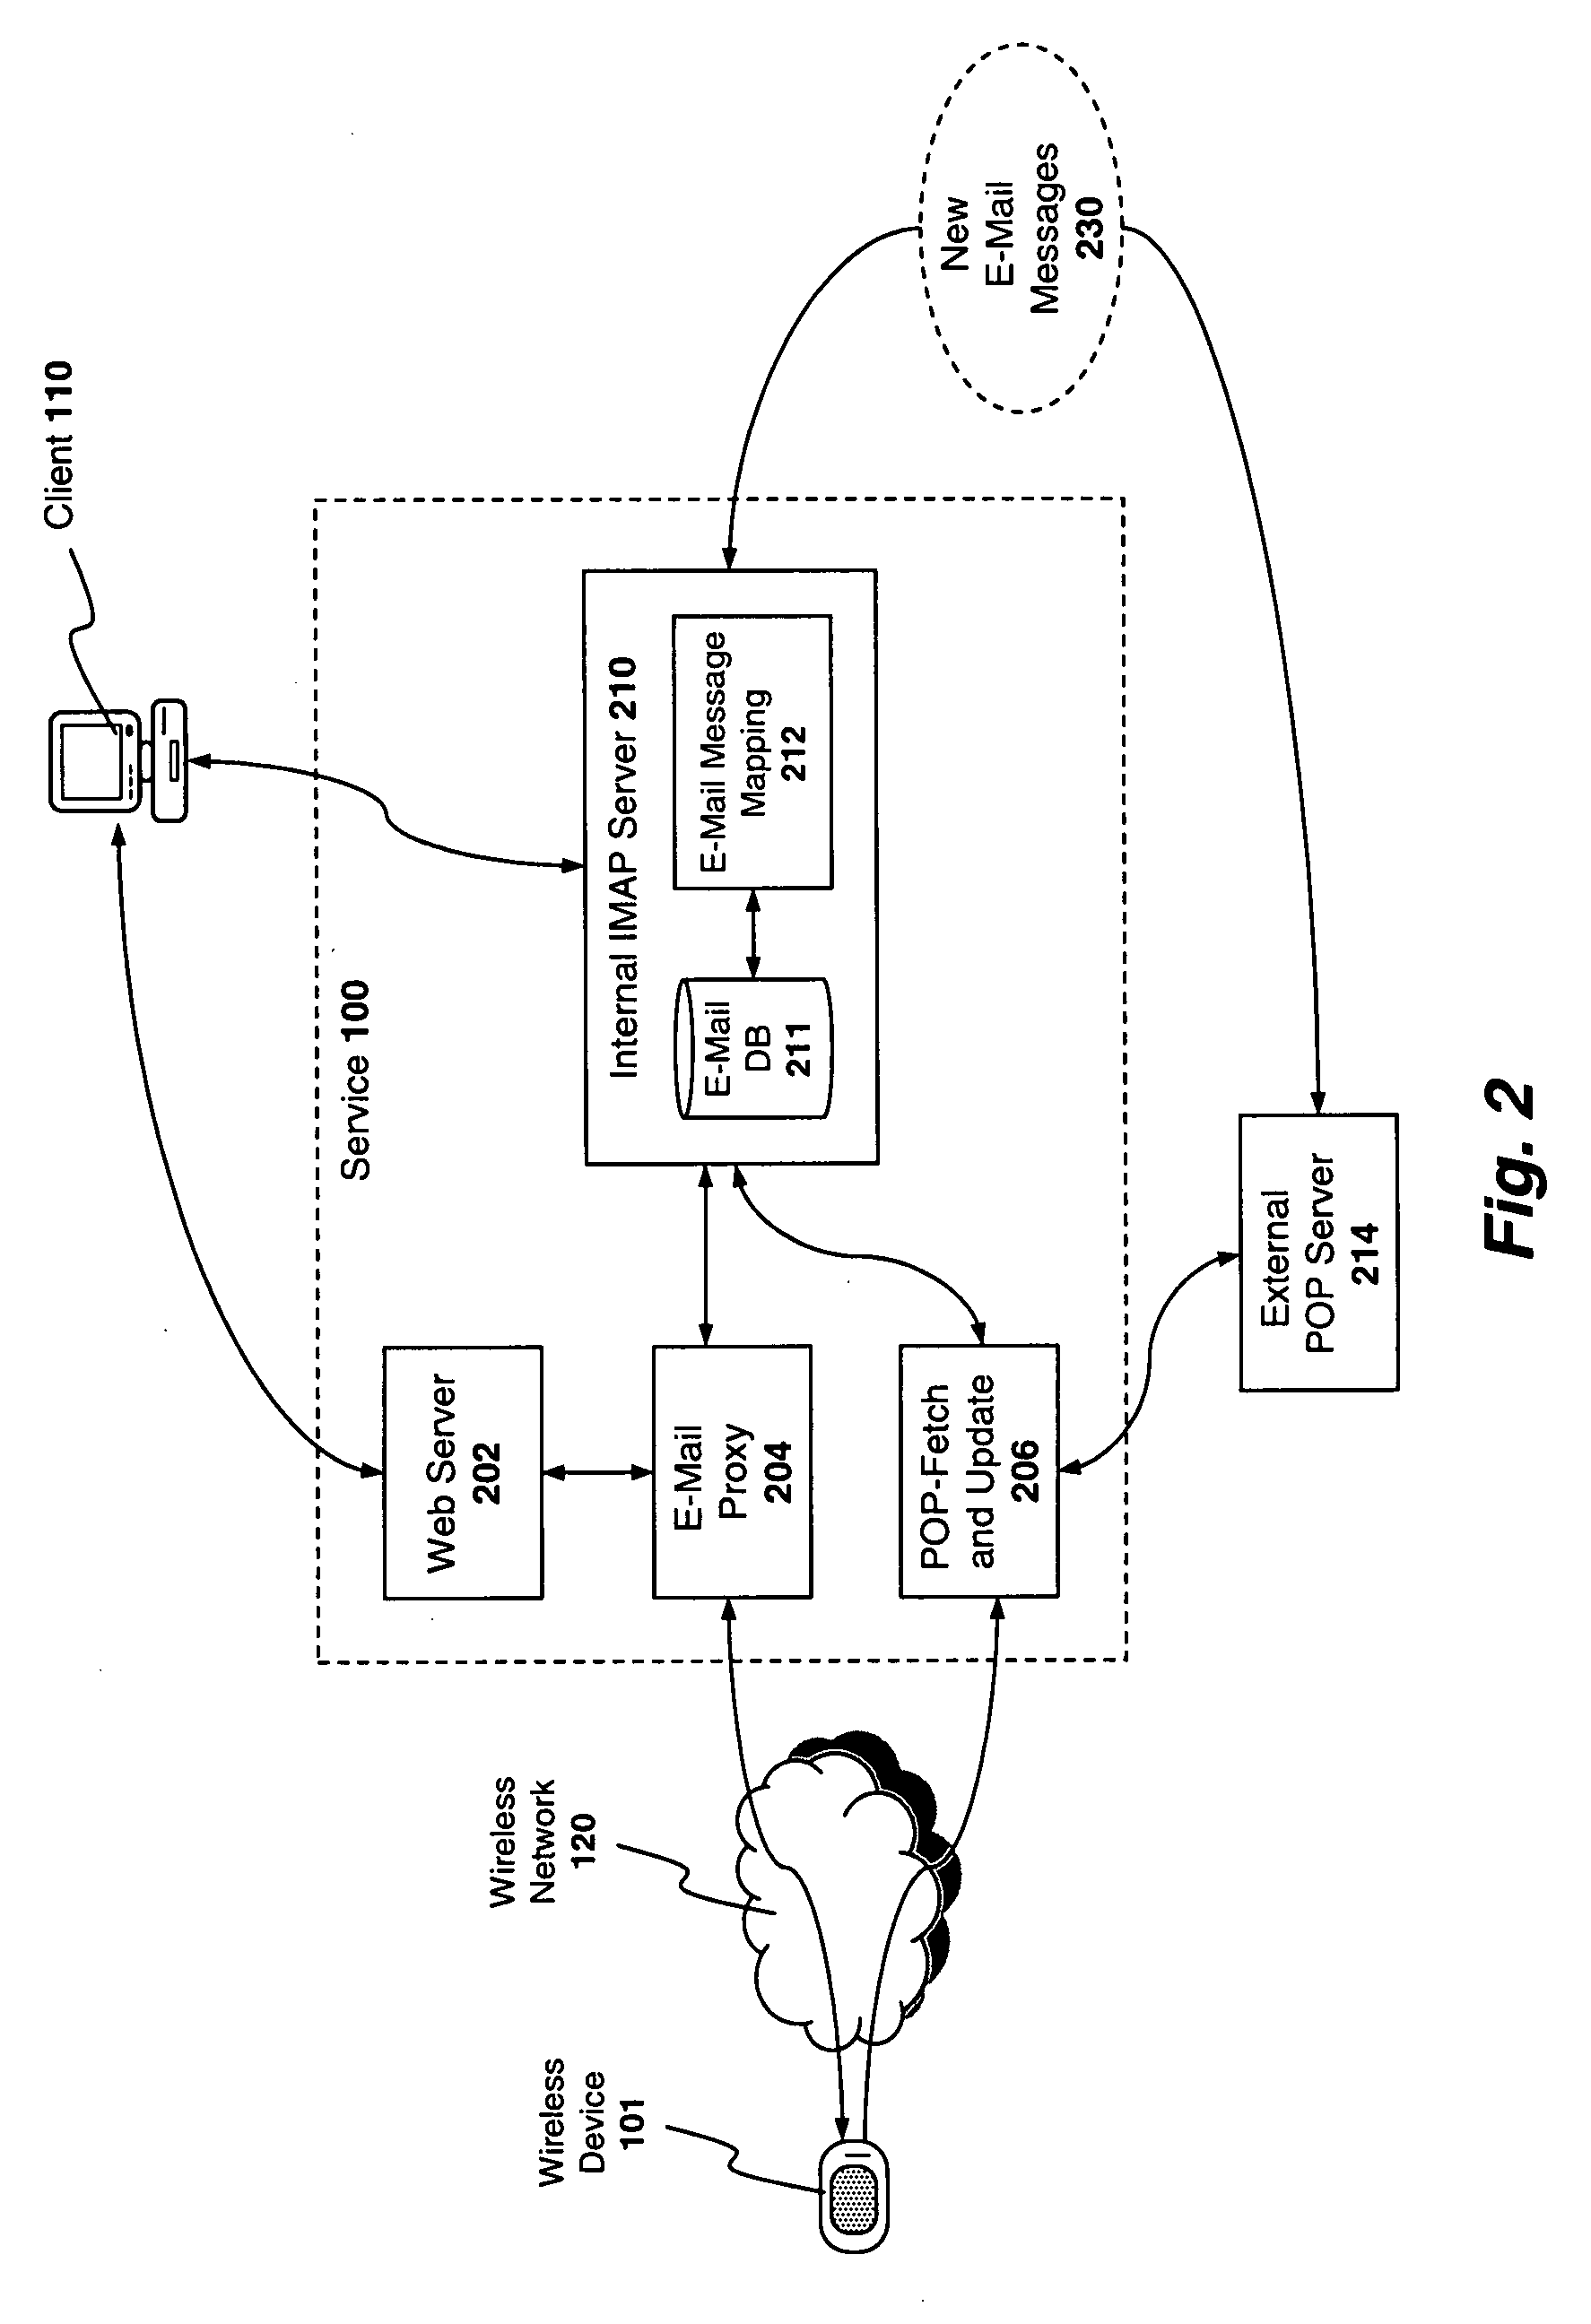 Apparatus and method for caching email messages within a wireless data service